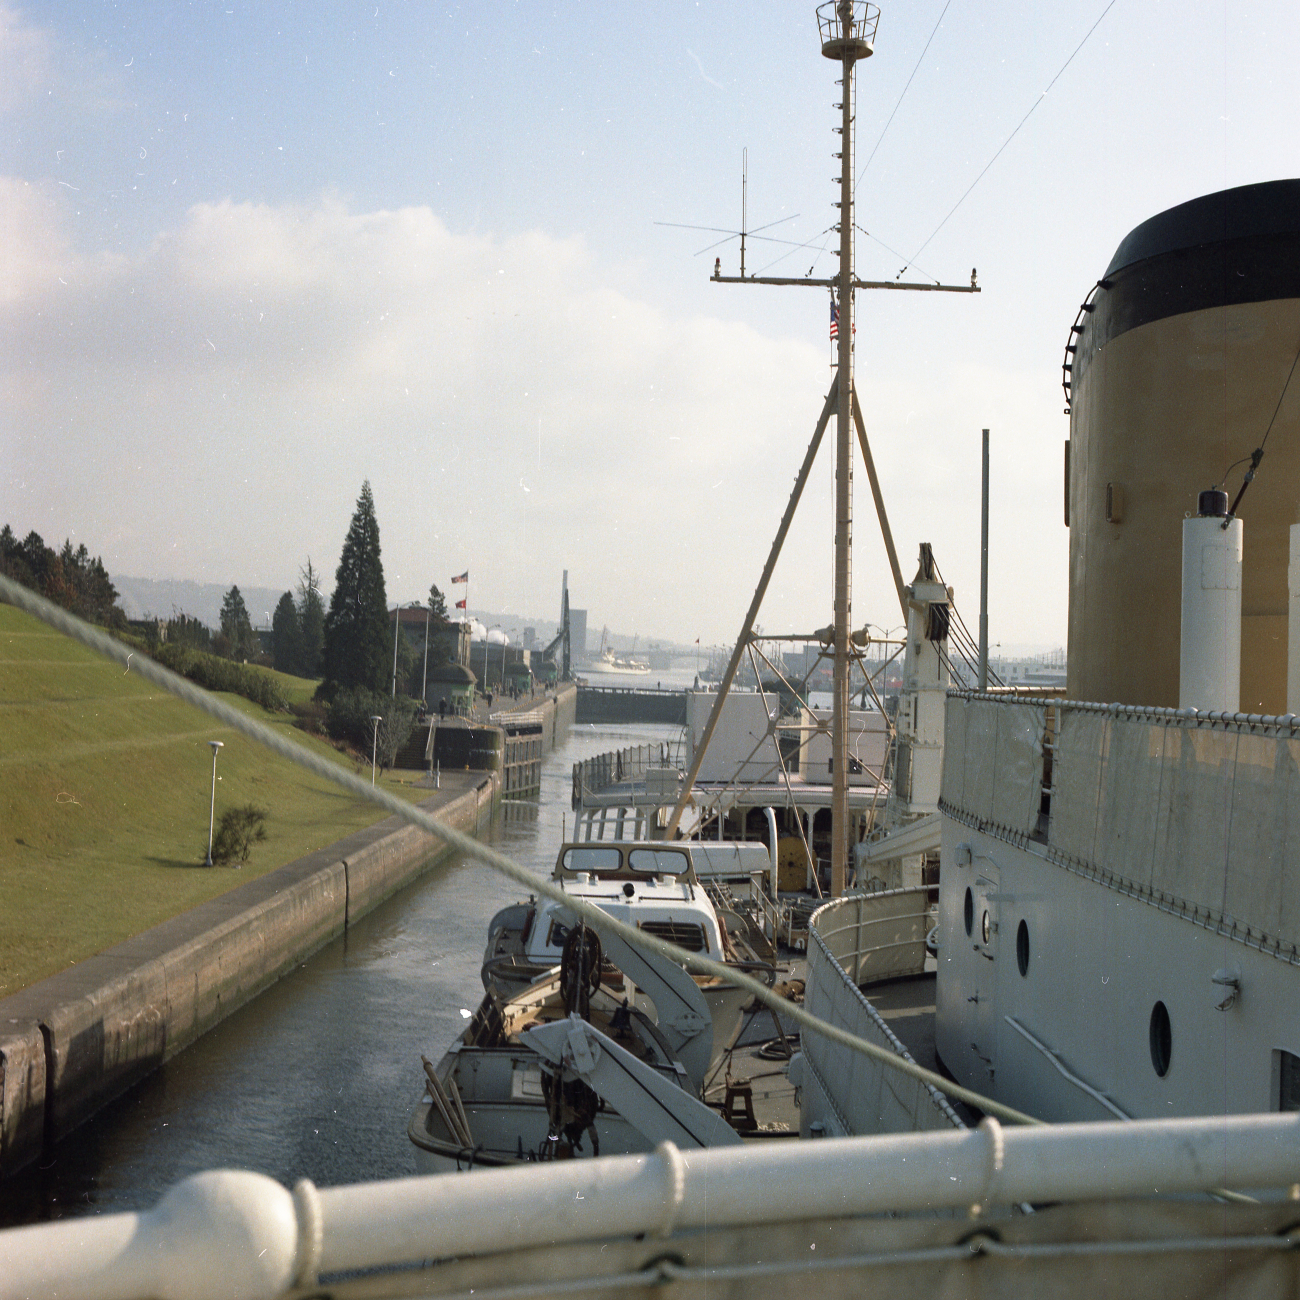 Looking aft as the USC&GS; Ship SURVEYOR proceeds out of the HiramM